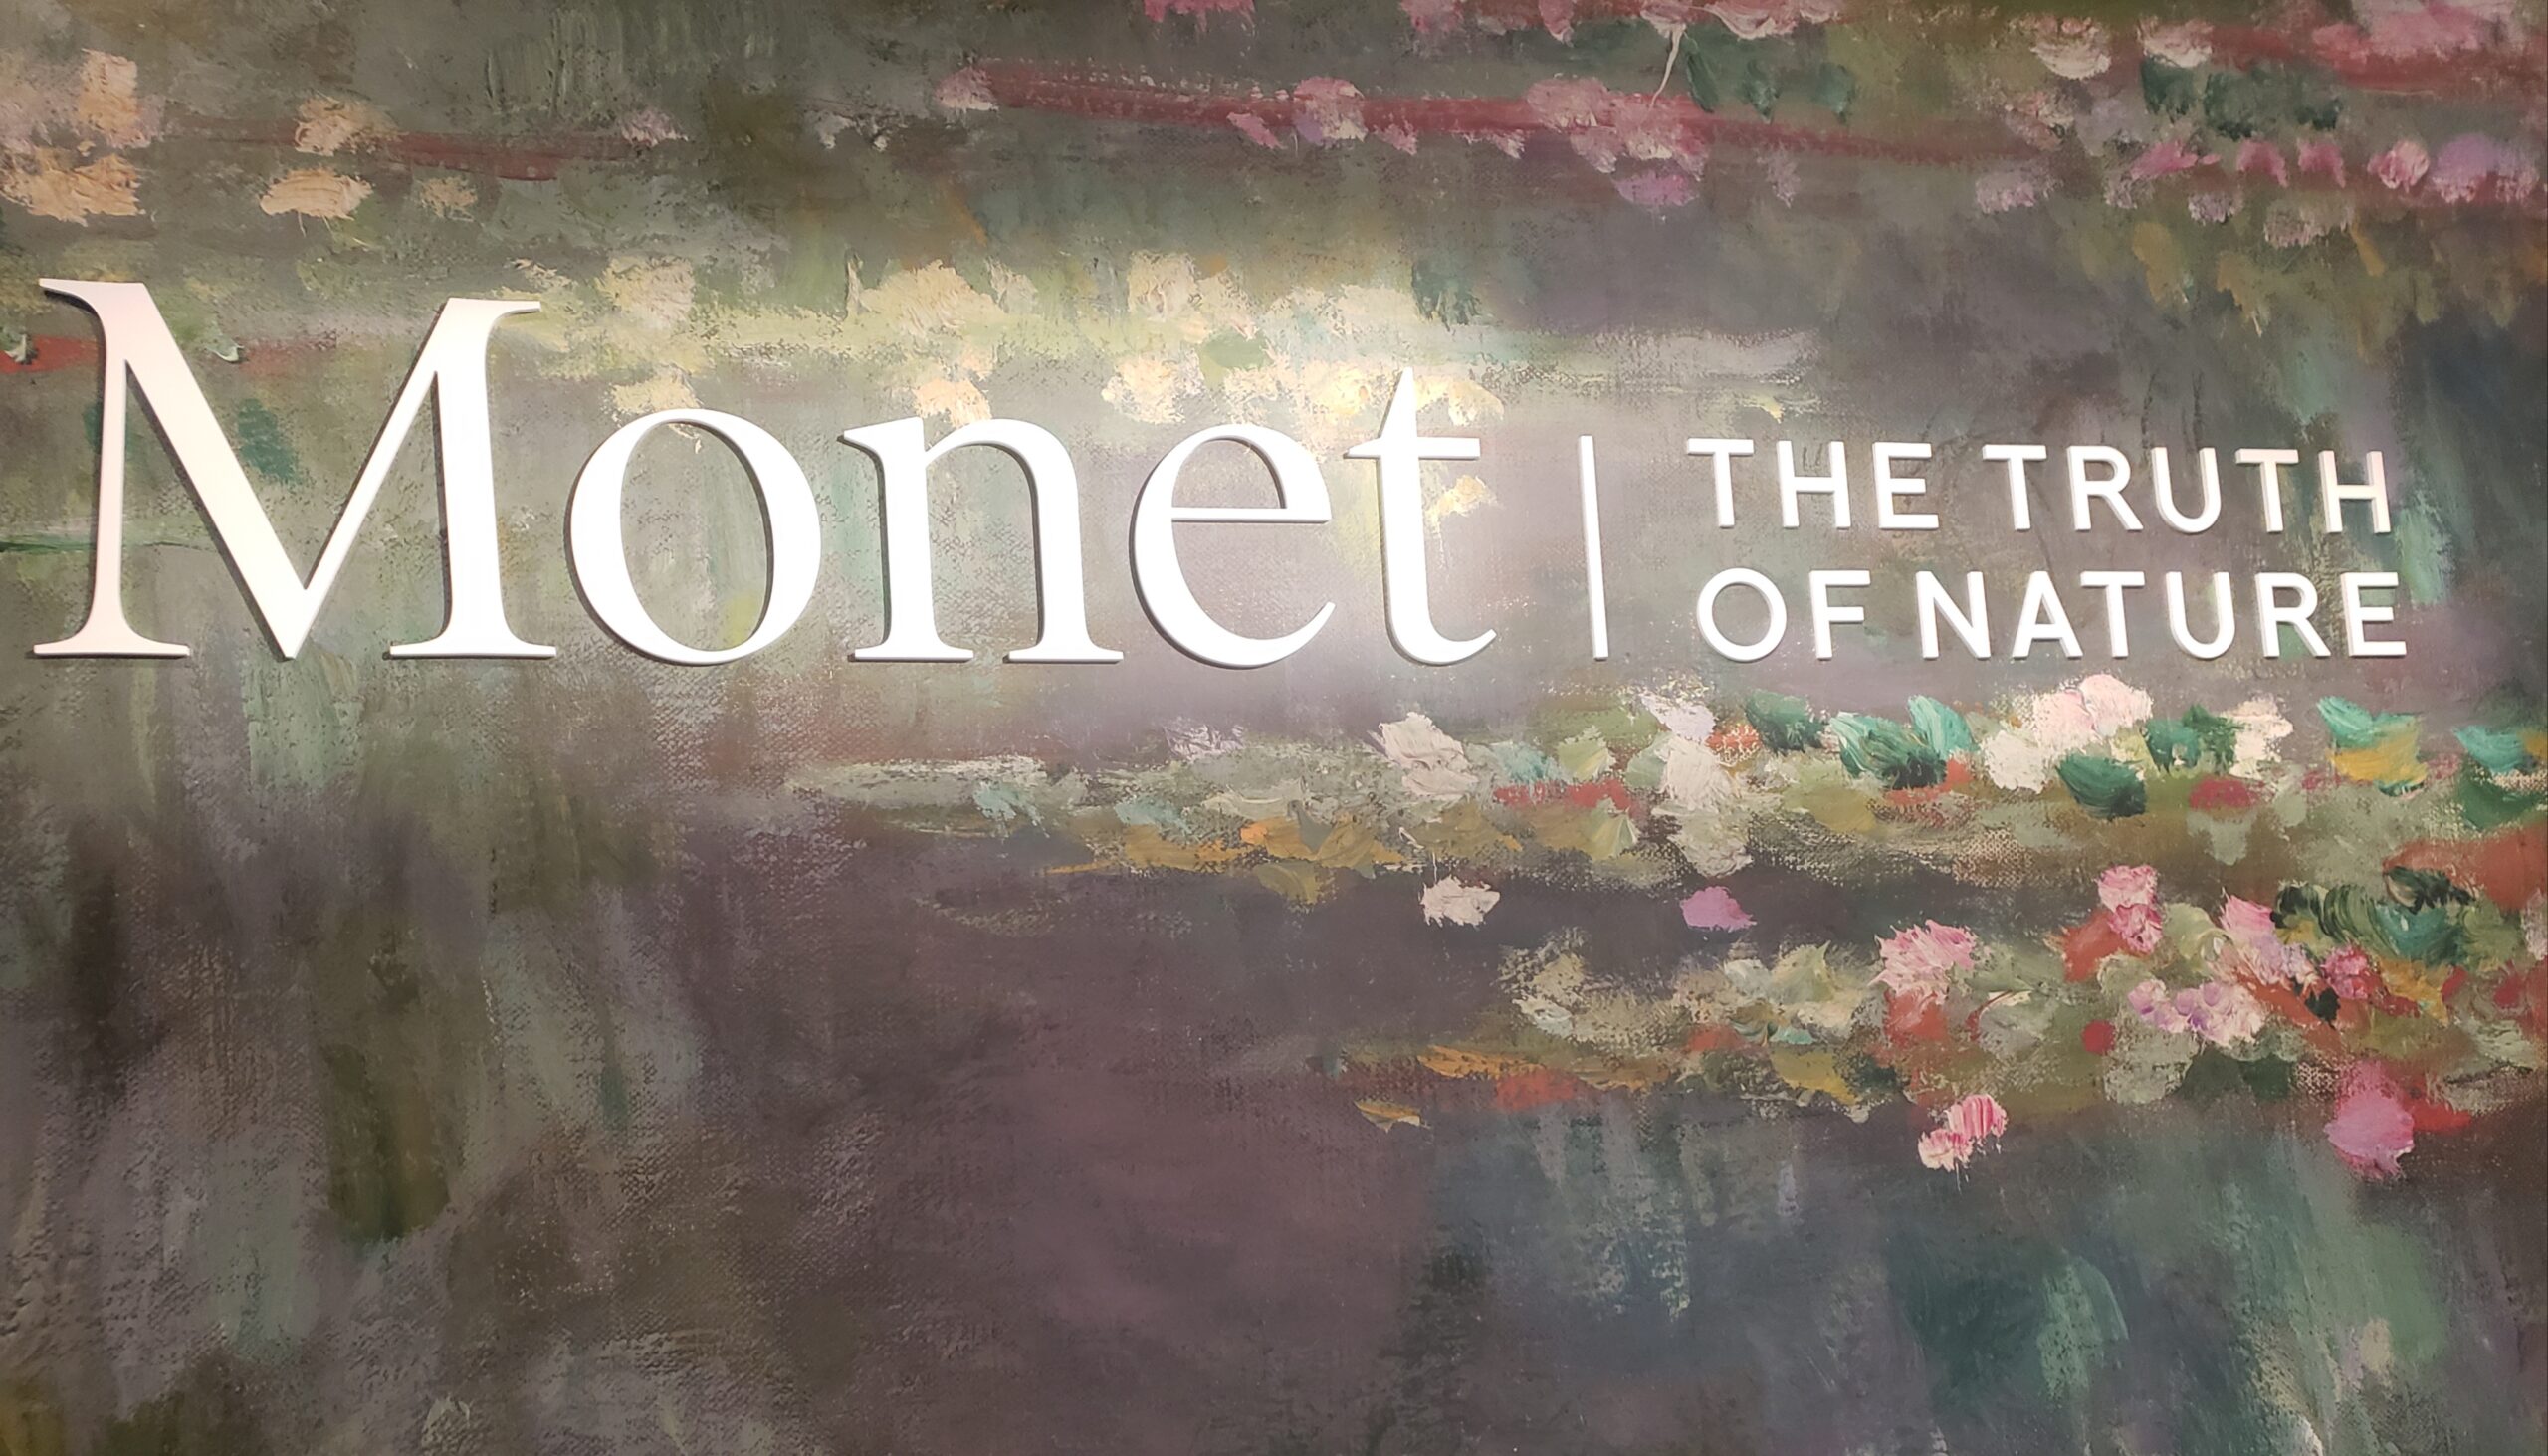 Monet | The Truth of Nature. Fine art exhibit at the Denver Art Museum. Photo by: Matthew McGuire